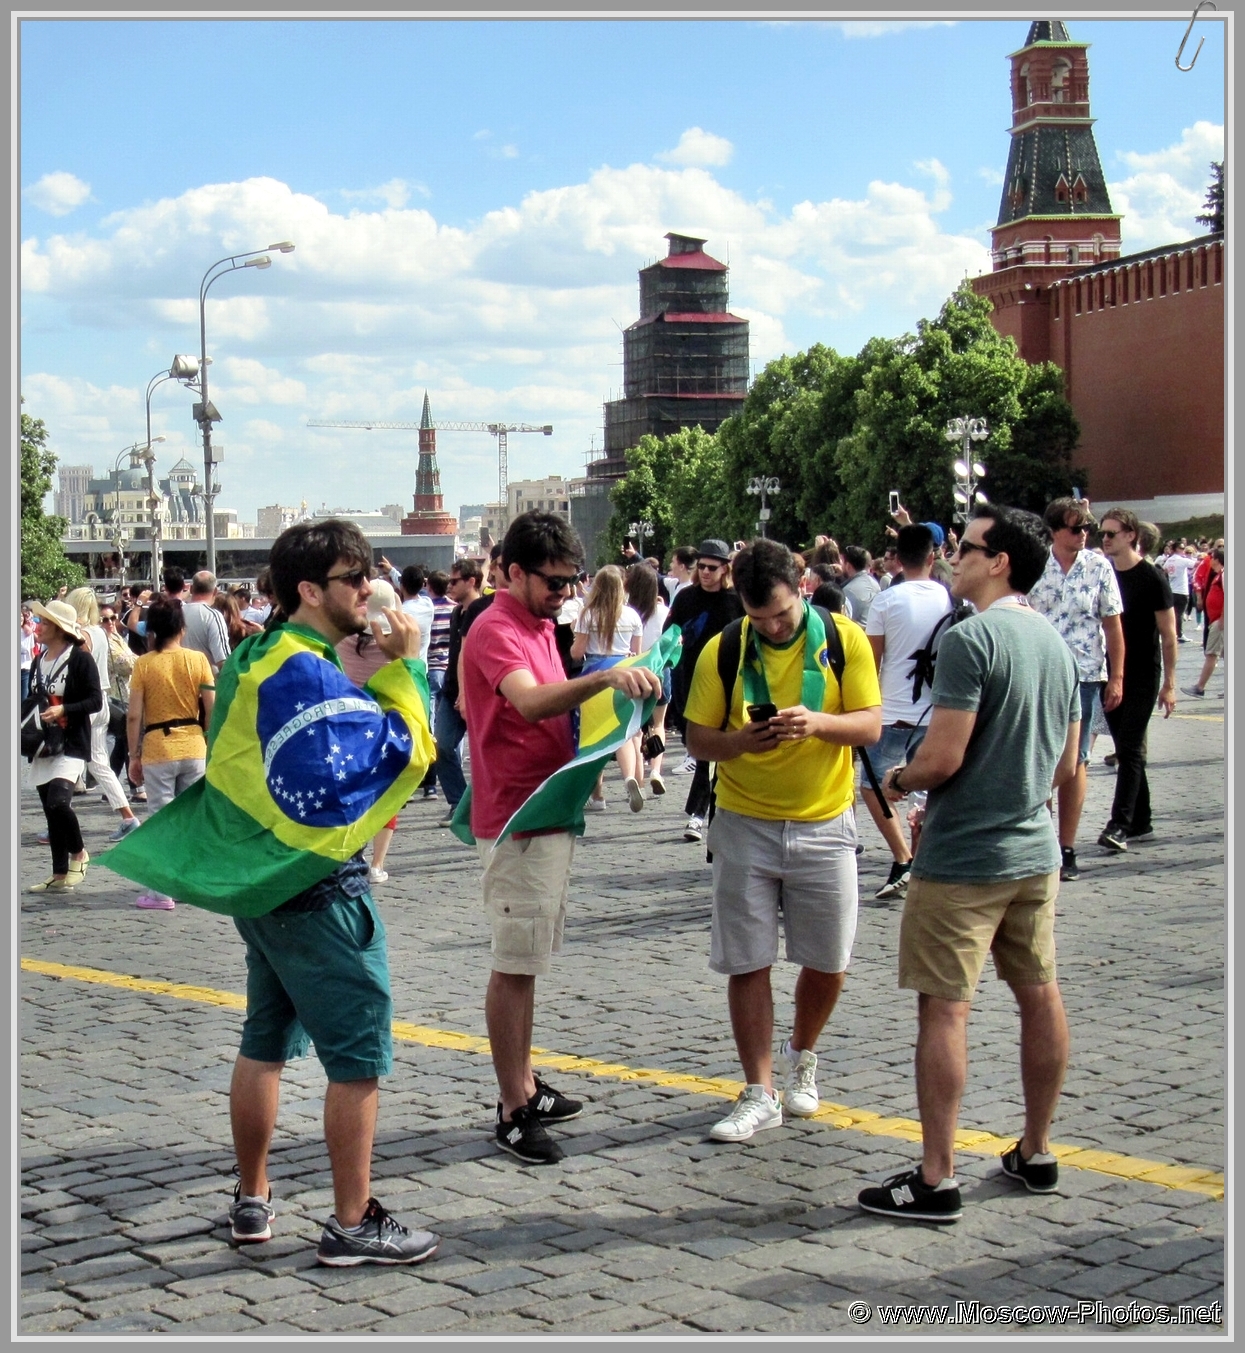 2018 FIFA World Cup. Football fans on Red Square in Moscow. 